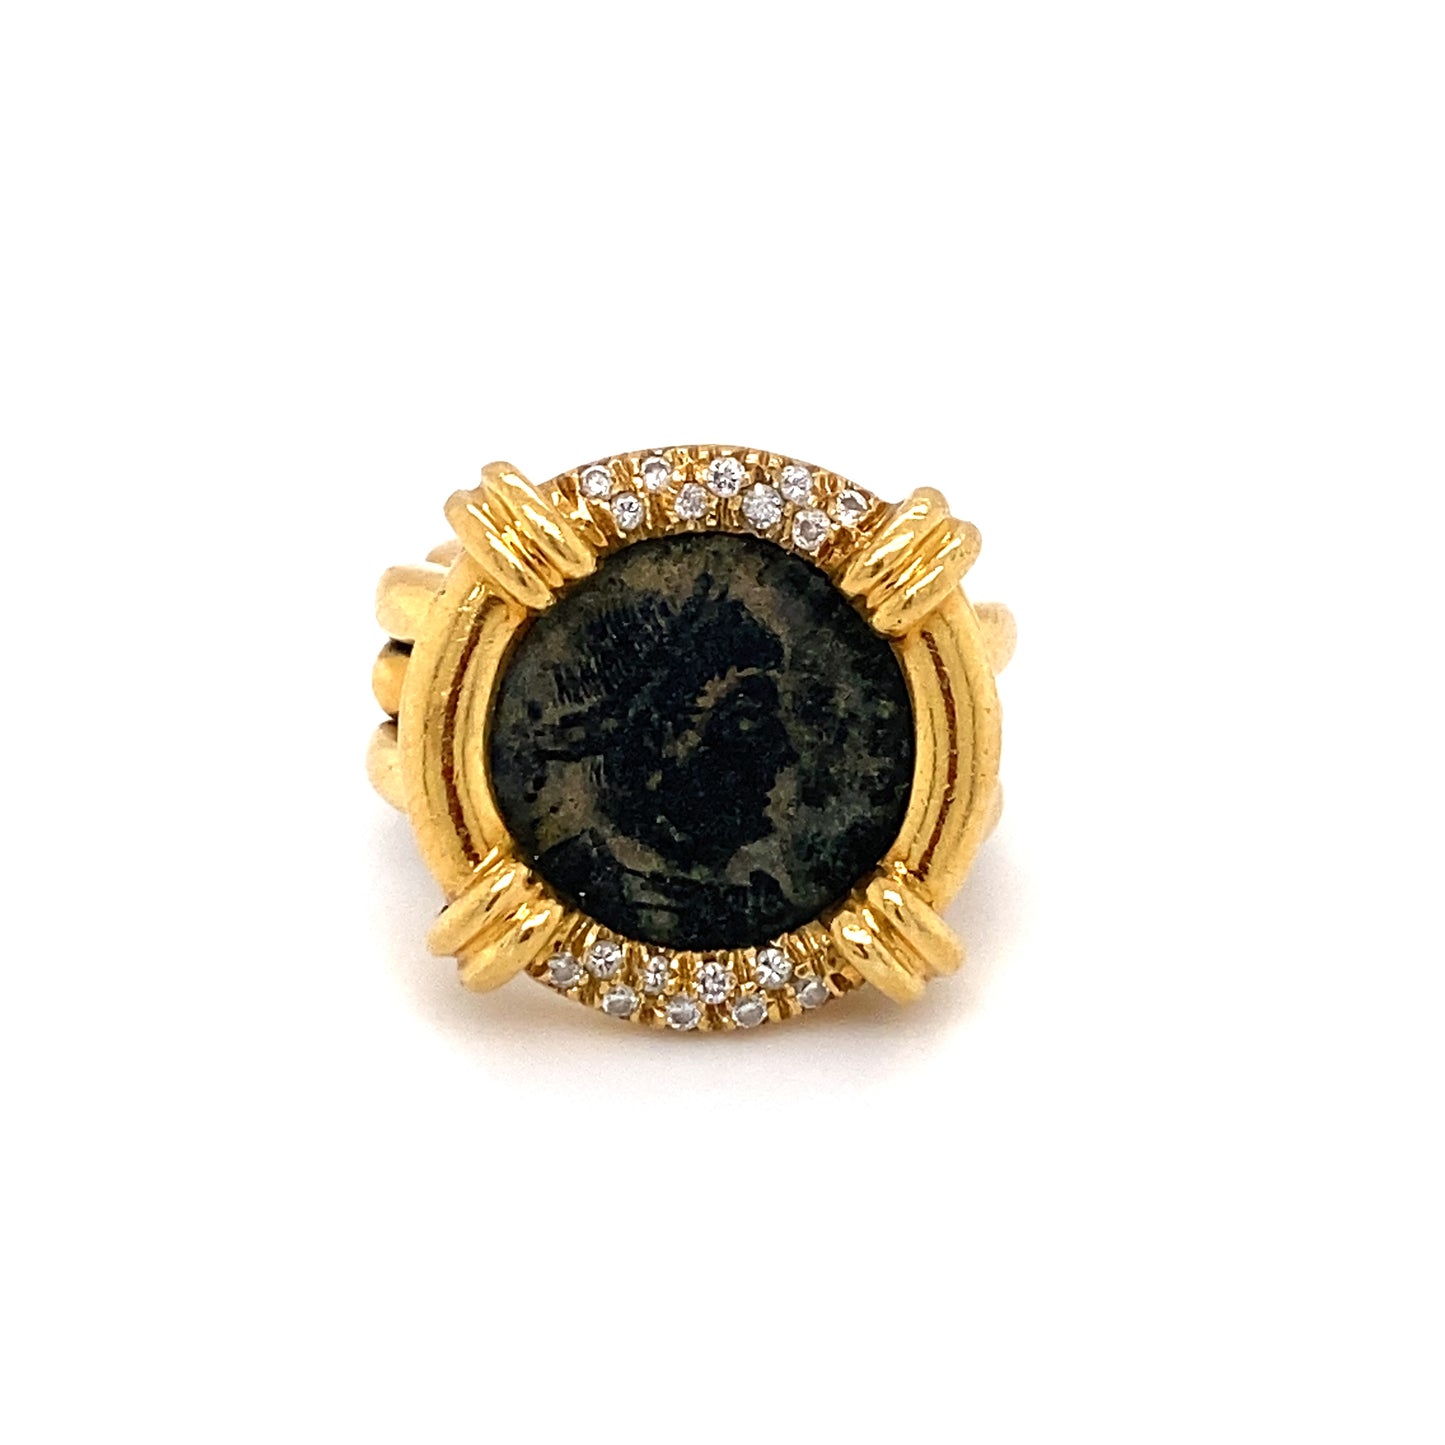 Circa 1990s Chain Link Roman Coin Ring With Diamonds in 18K Gold